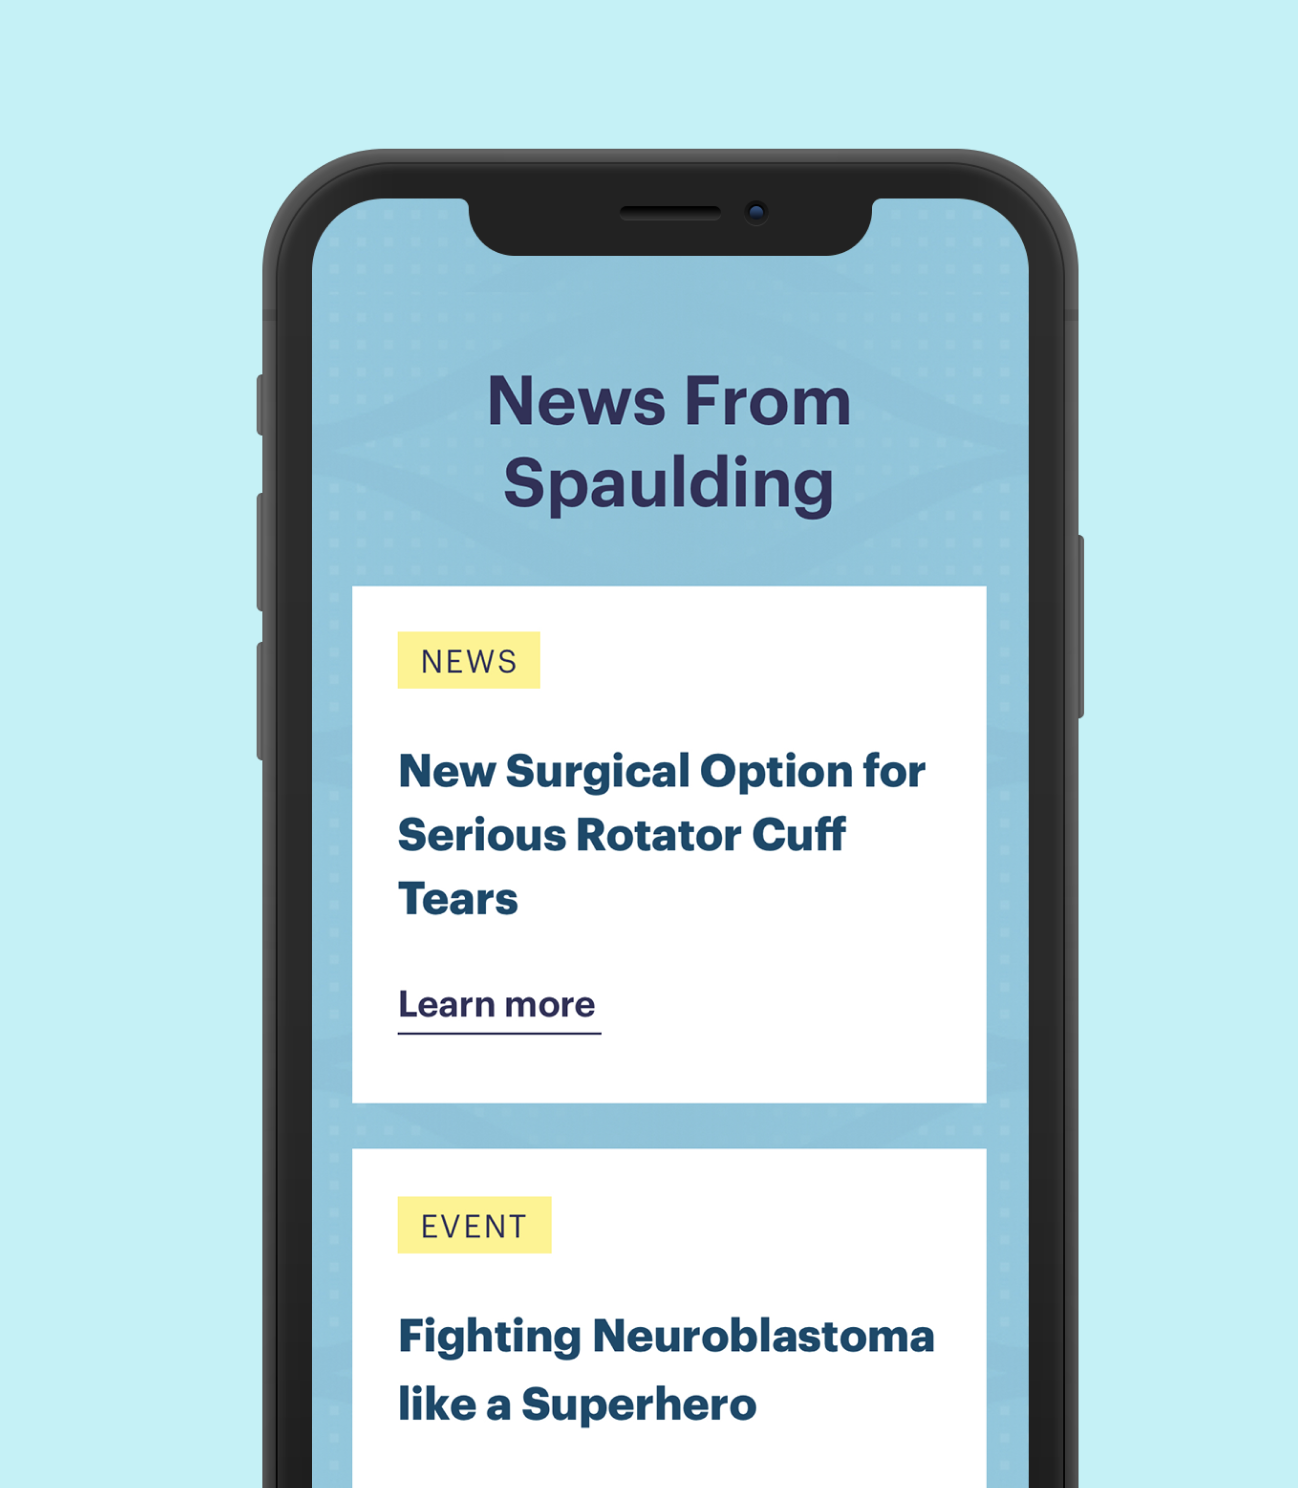 Mobile phone with the Spaulding news feed shown.